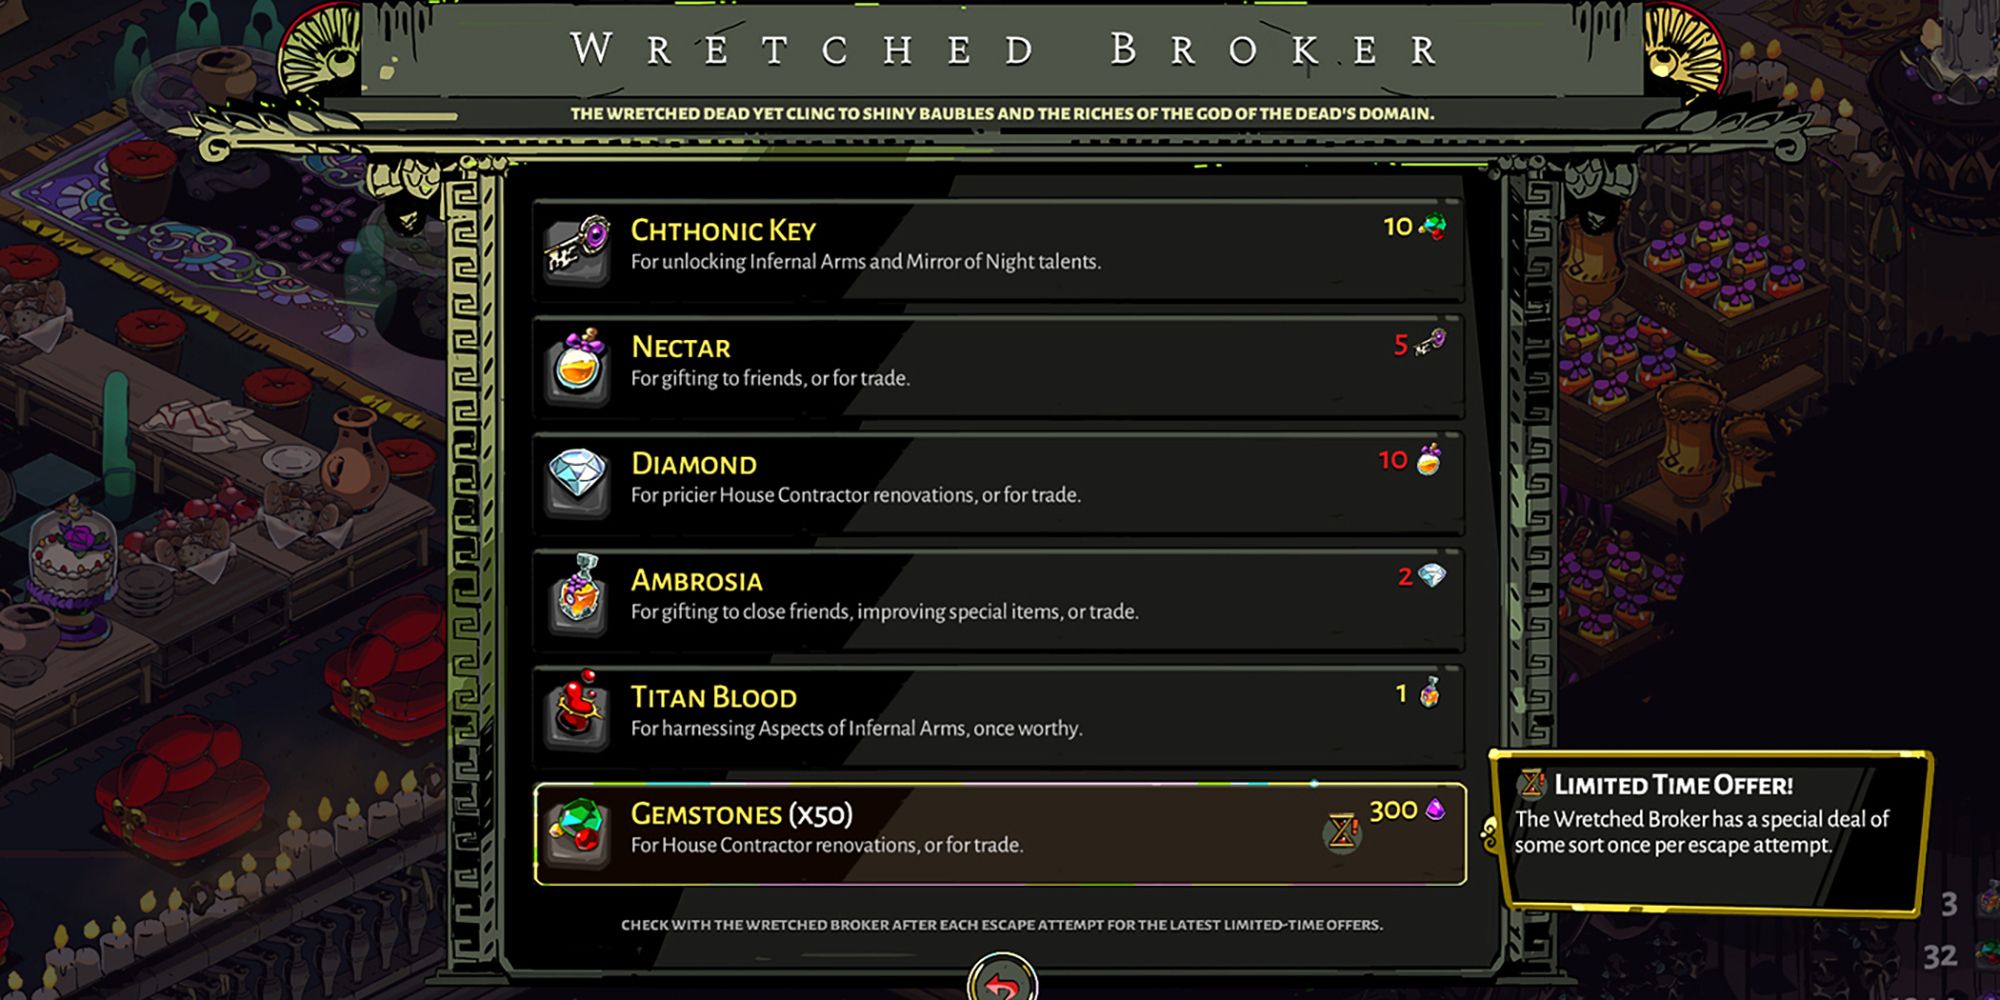 Hades - Hovering Over The Limited Time Offer From The Wretched Broker